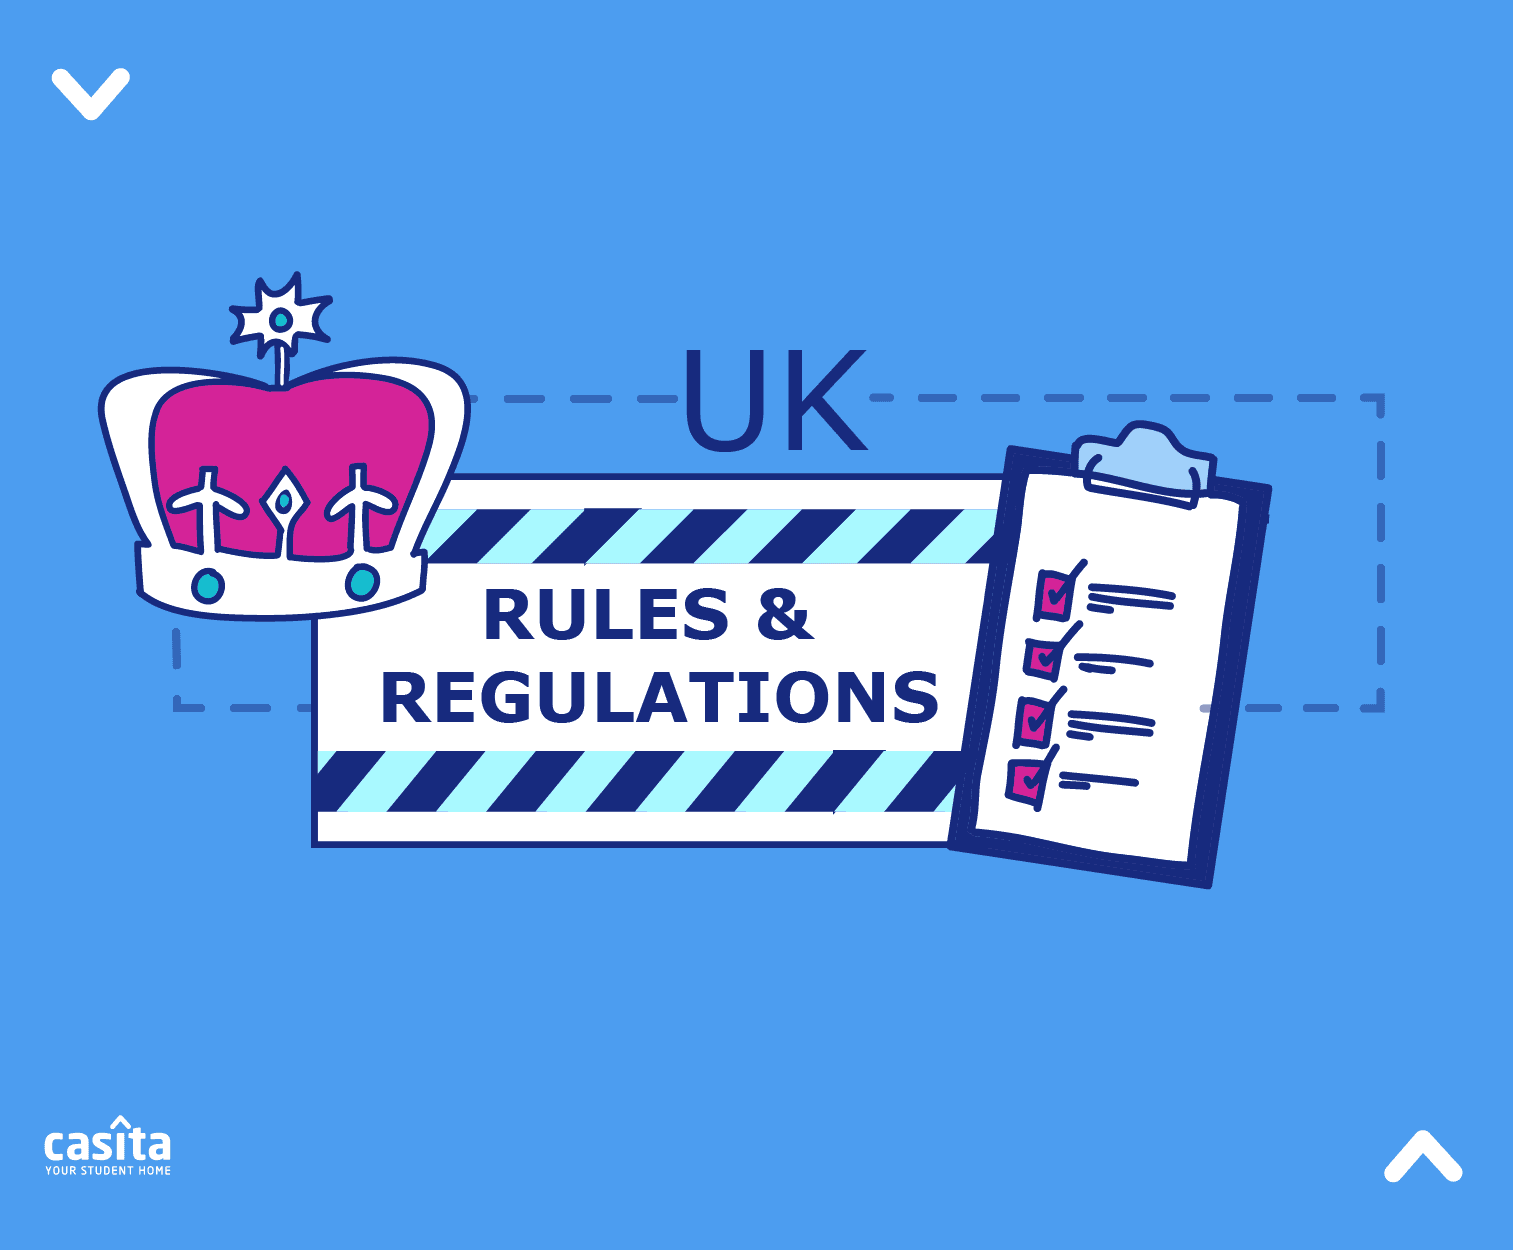 What Are the Rules of UK: UK Common Rules and Regulations?